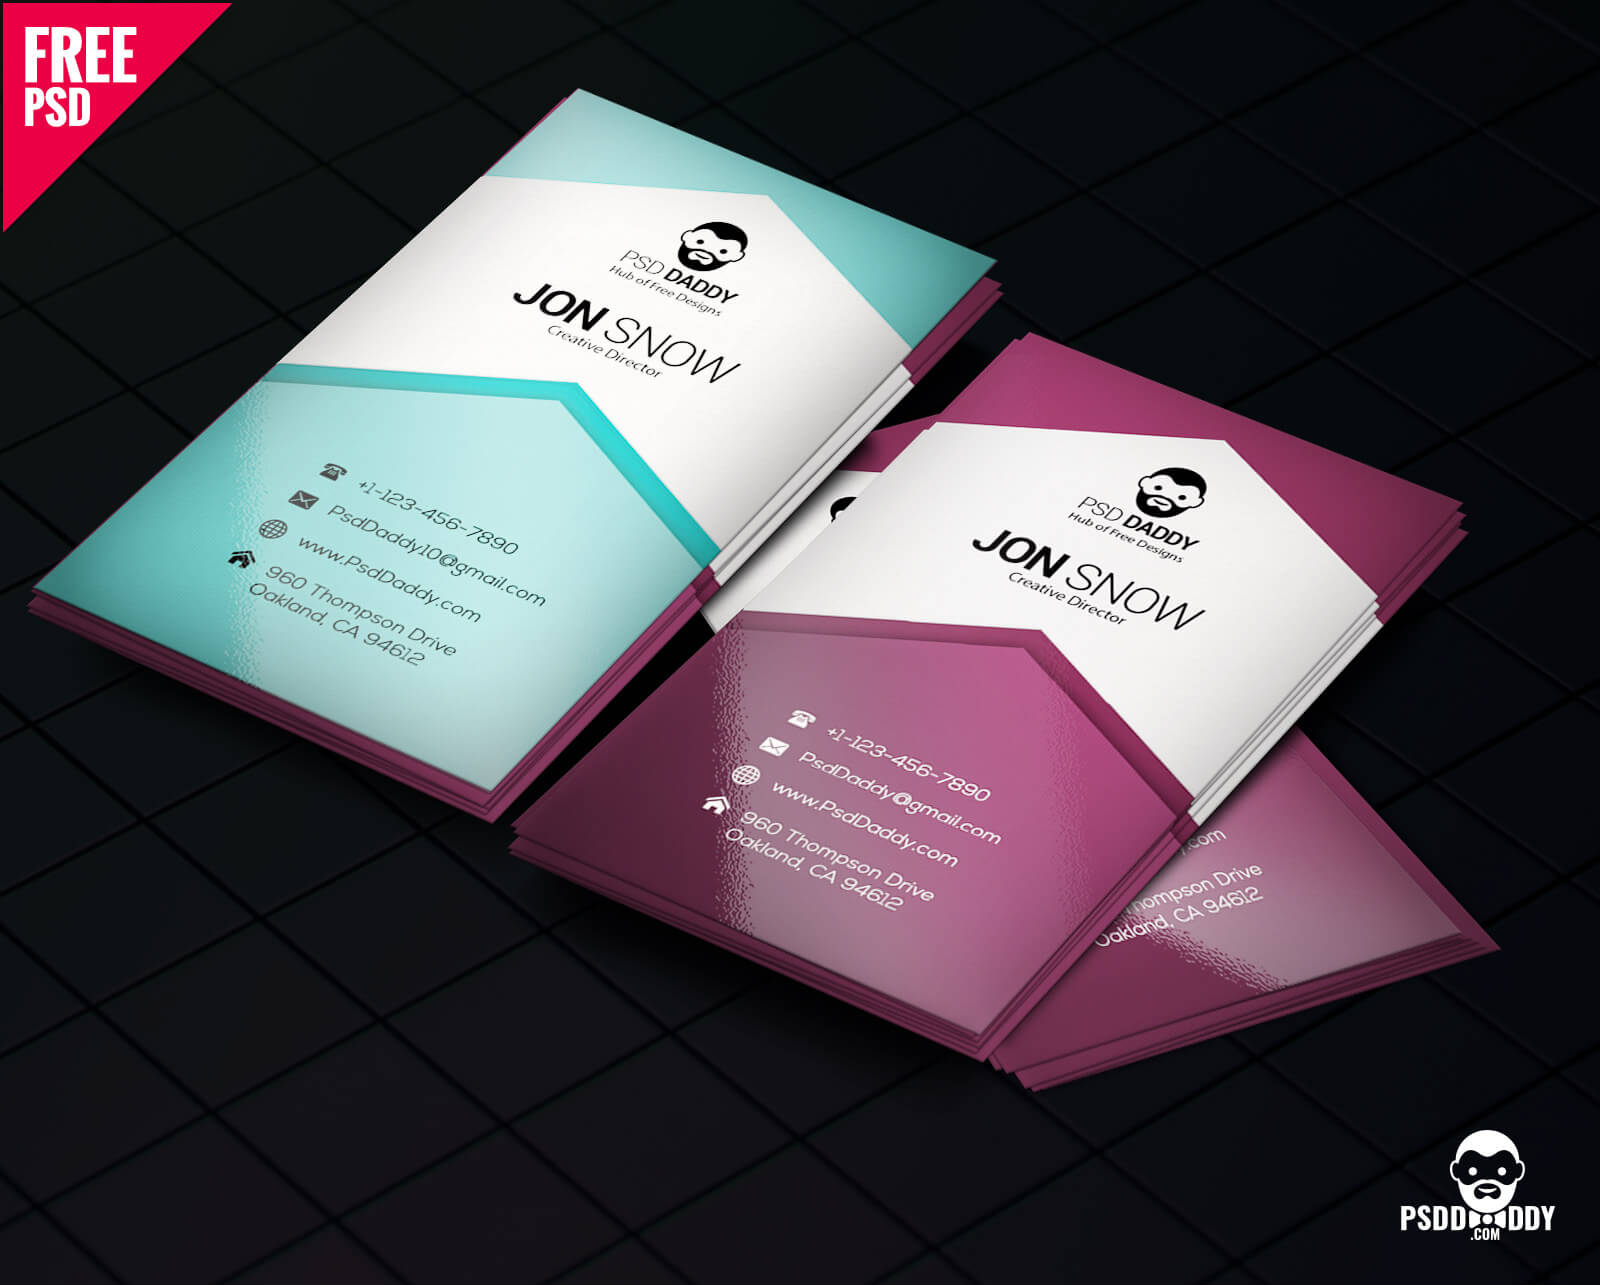 Download]Creative Business Card Psd Free | Psddaddy Intended For Designer Visiting Cards Templates